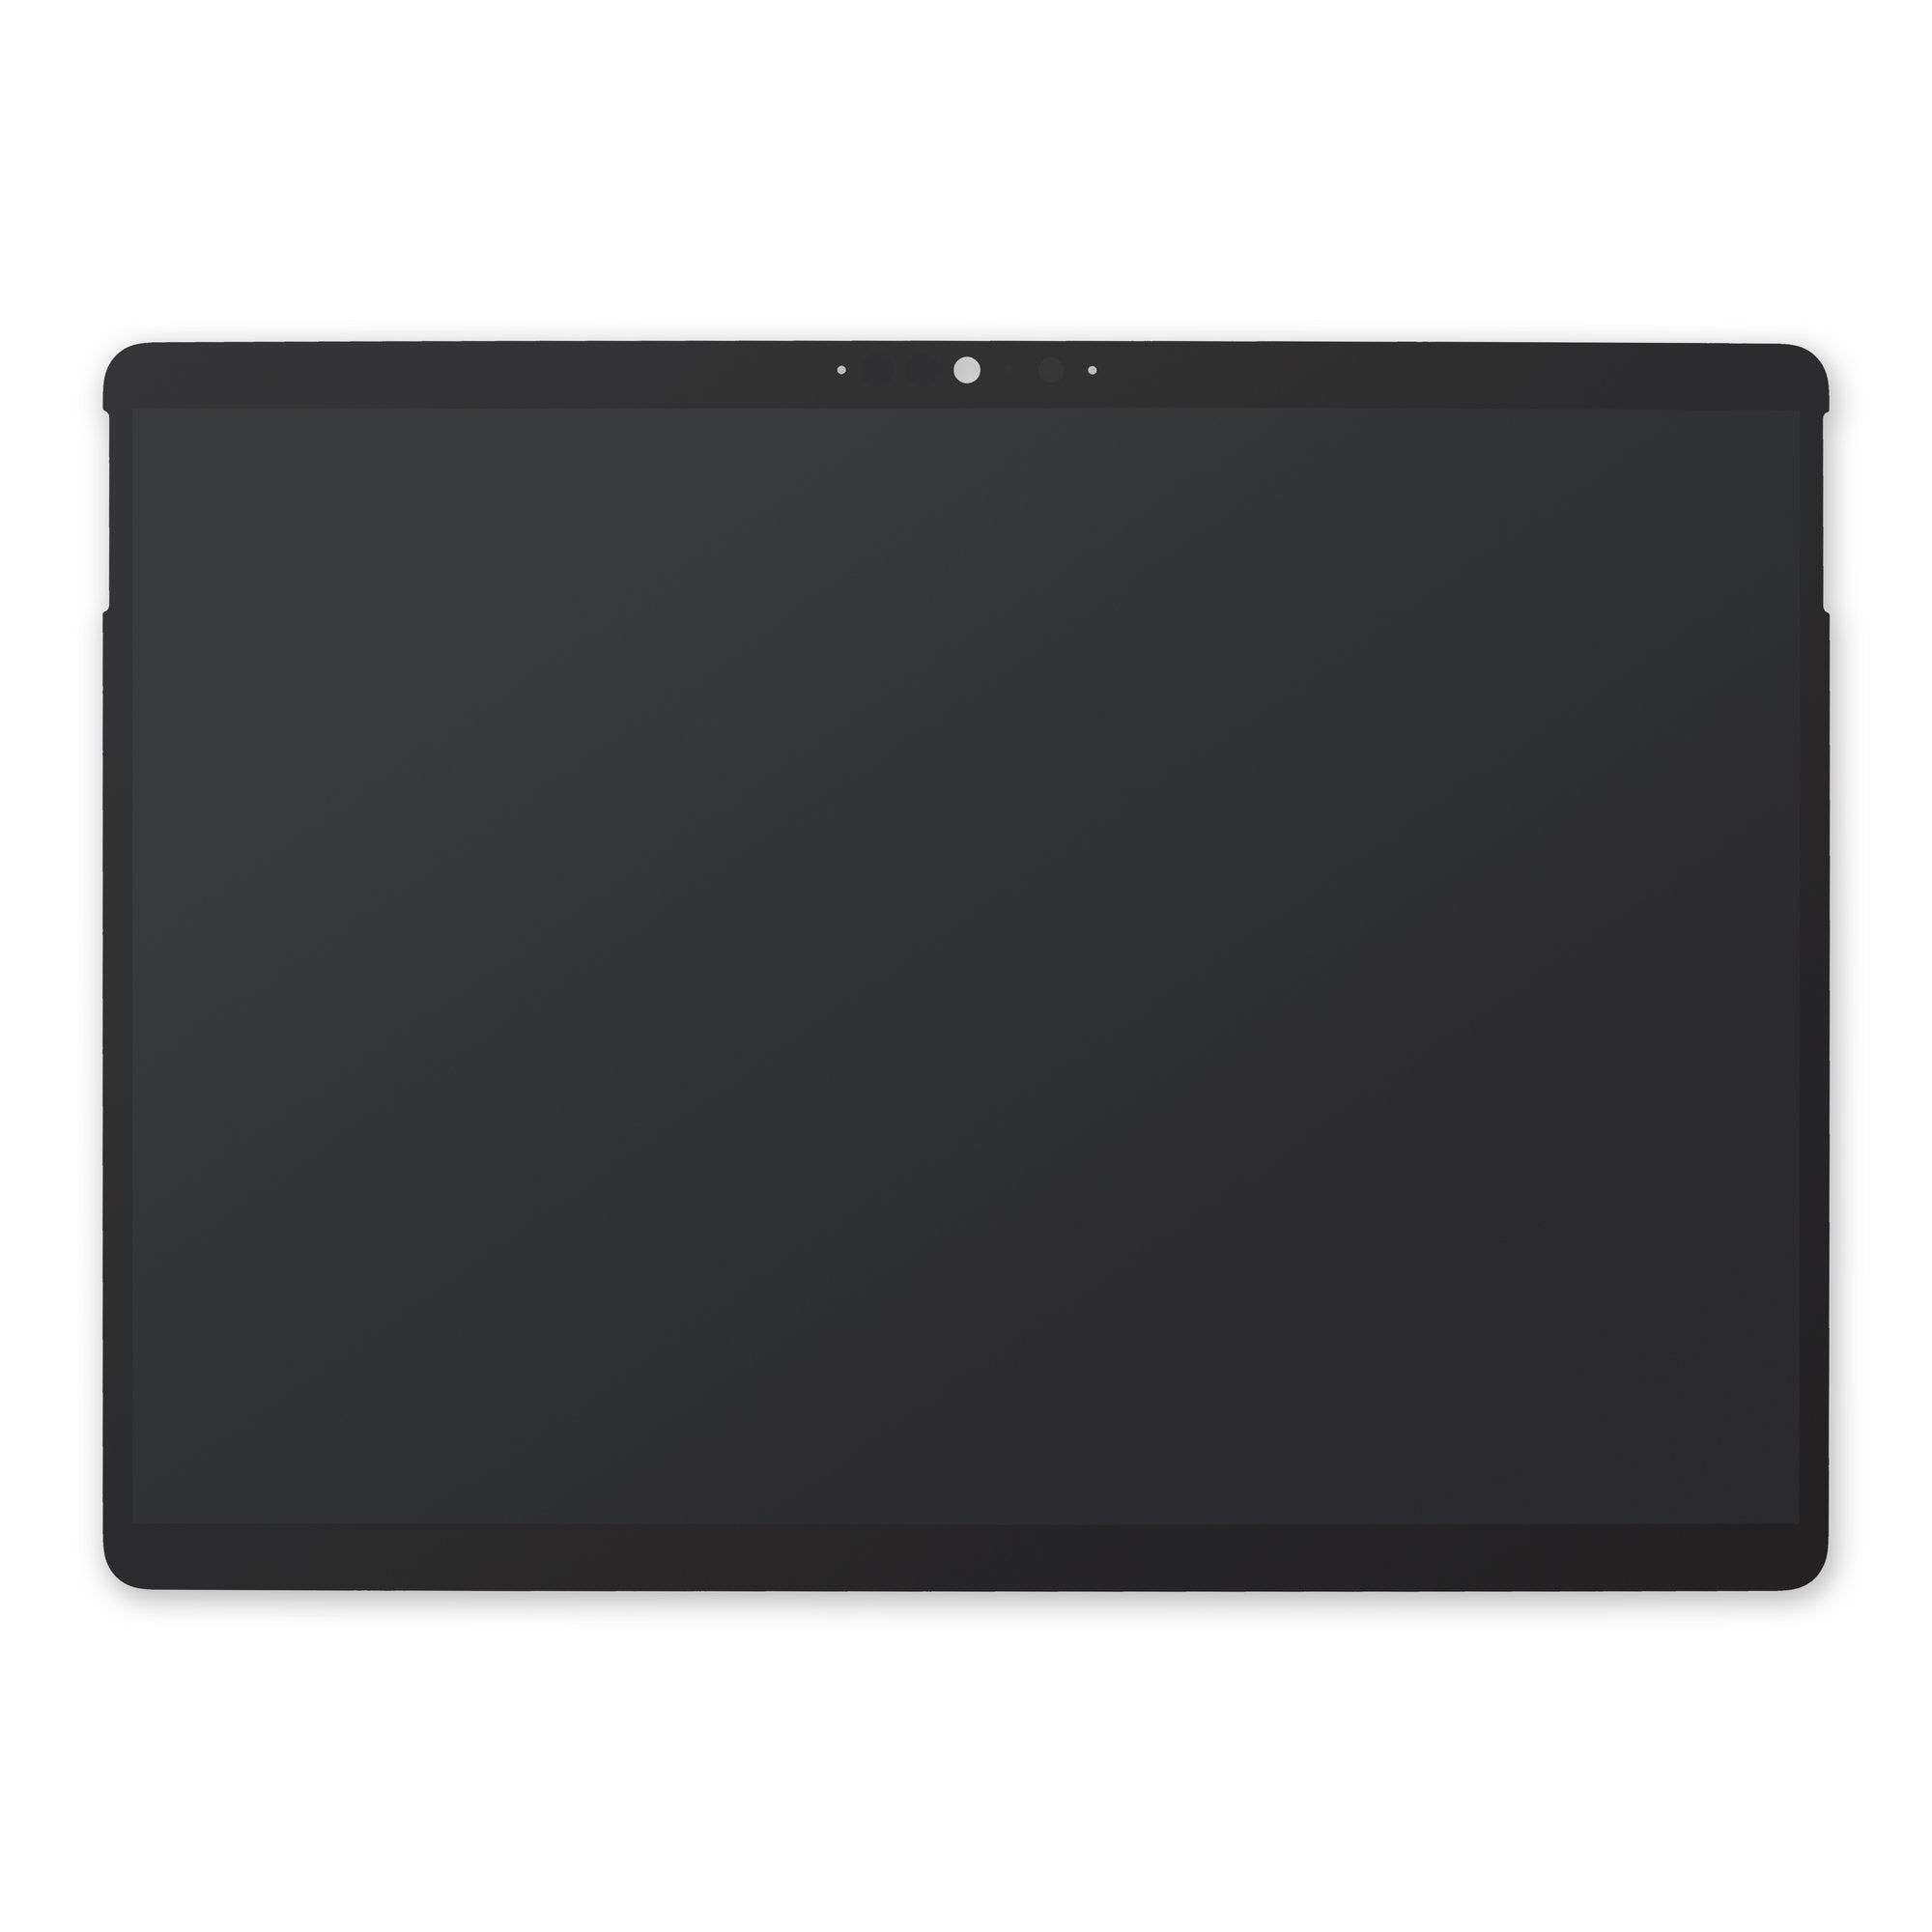 Surface Pro X Screen - Genuine OEM Part Only